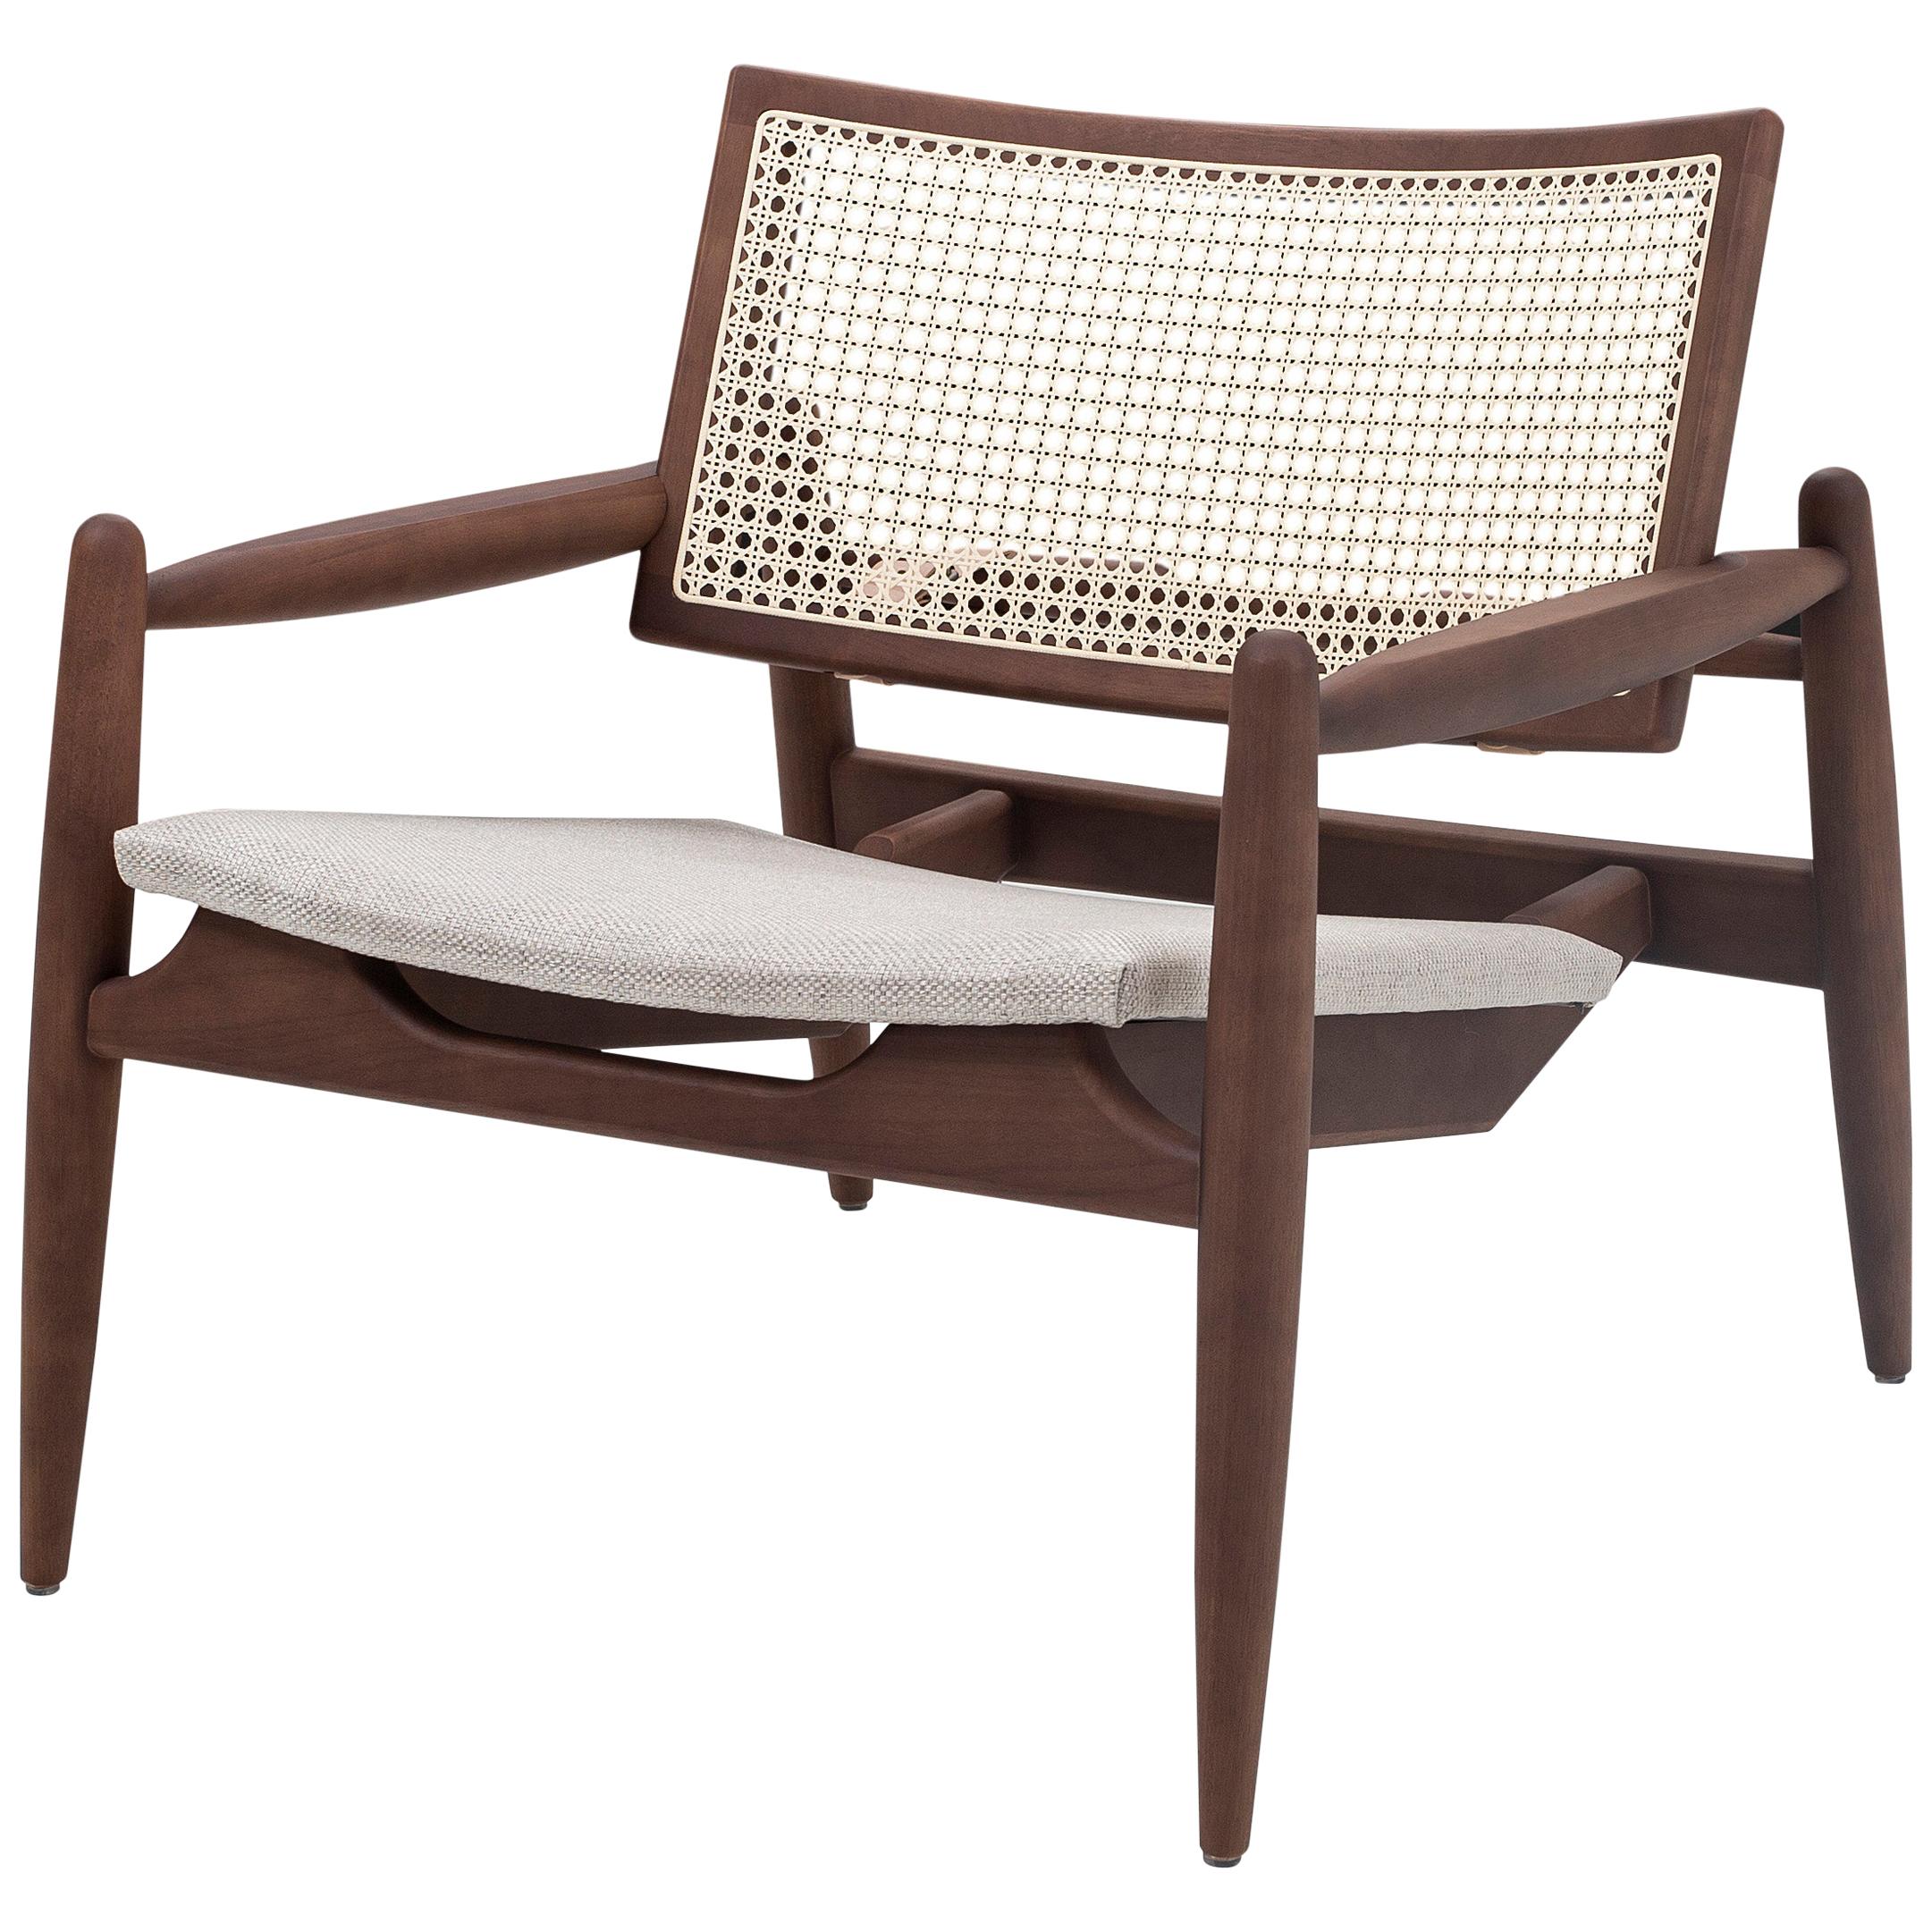 Soho Contemporary Cane-Back Chair in Walnut Finish and Oatmeal Fabric